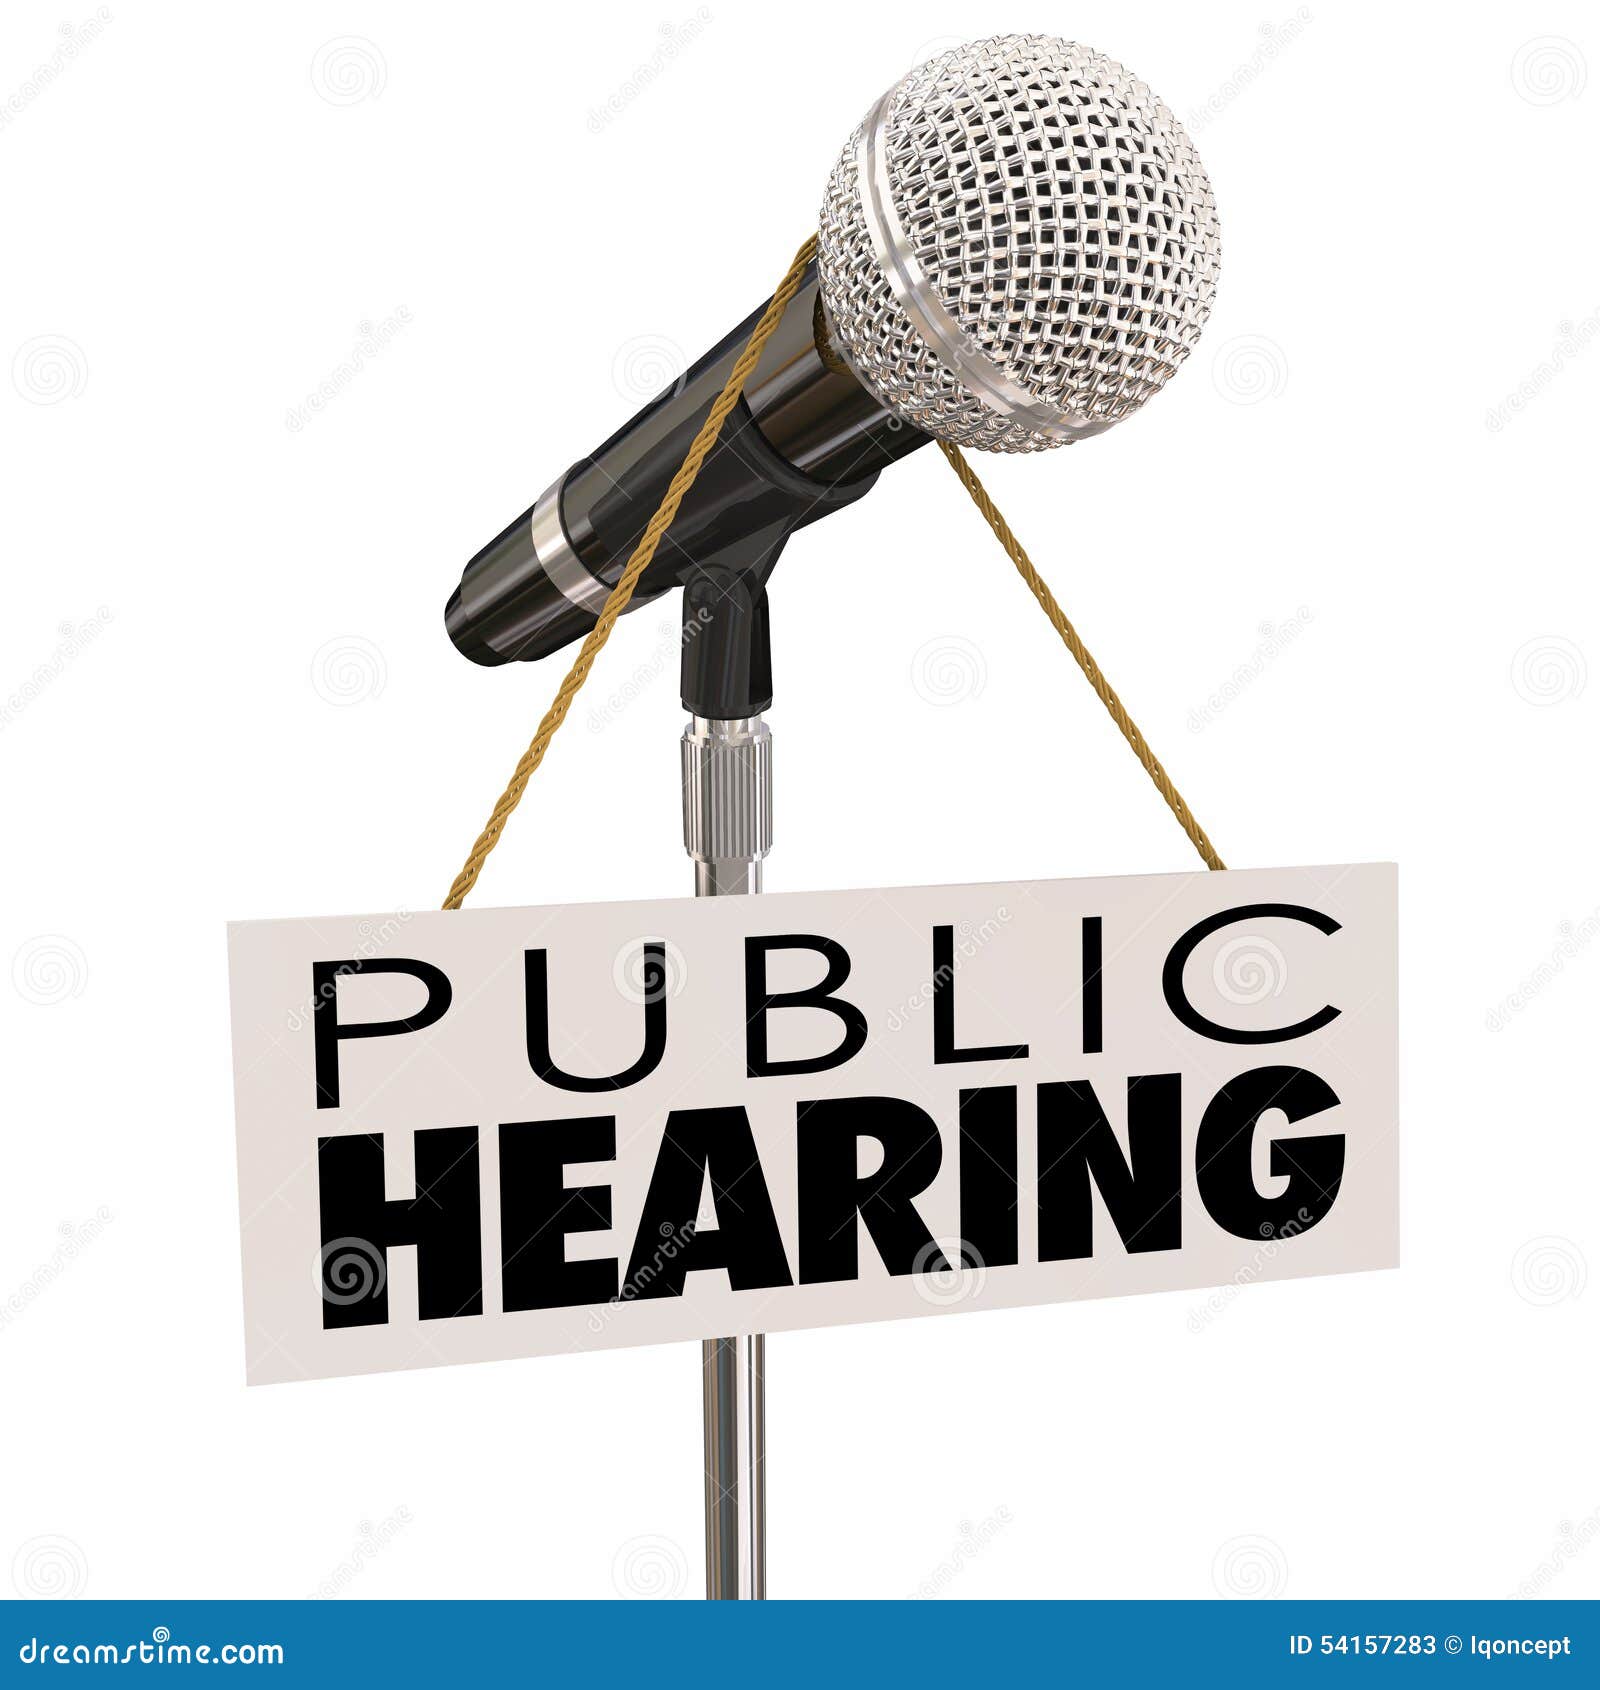 public hearing information meeting share opinion feedback